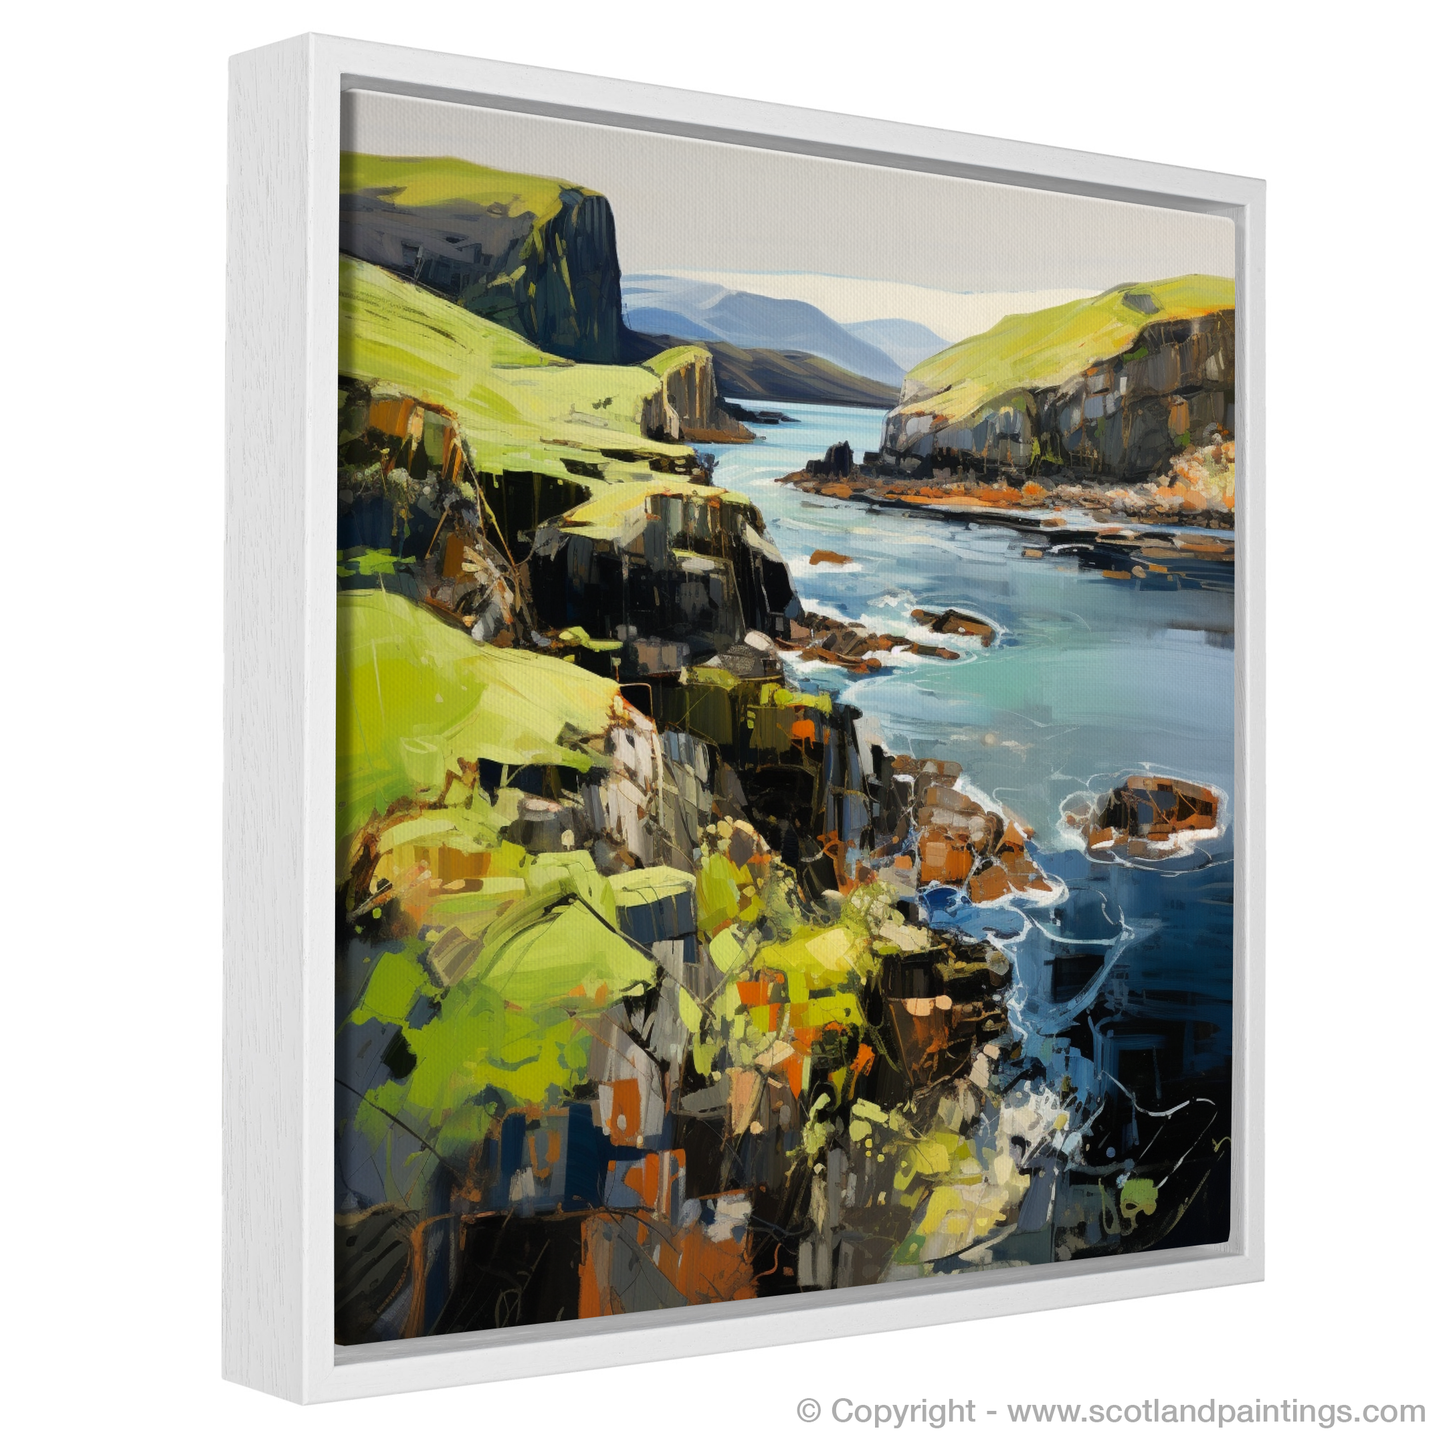 Painting and Art Print of Easdale Sound, Easdale, Argyll and Bute entitled "Easdale Sound Reverie: An Expressionist Homage to Scottish Wilderness".